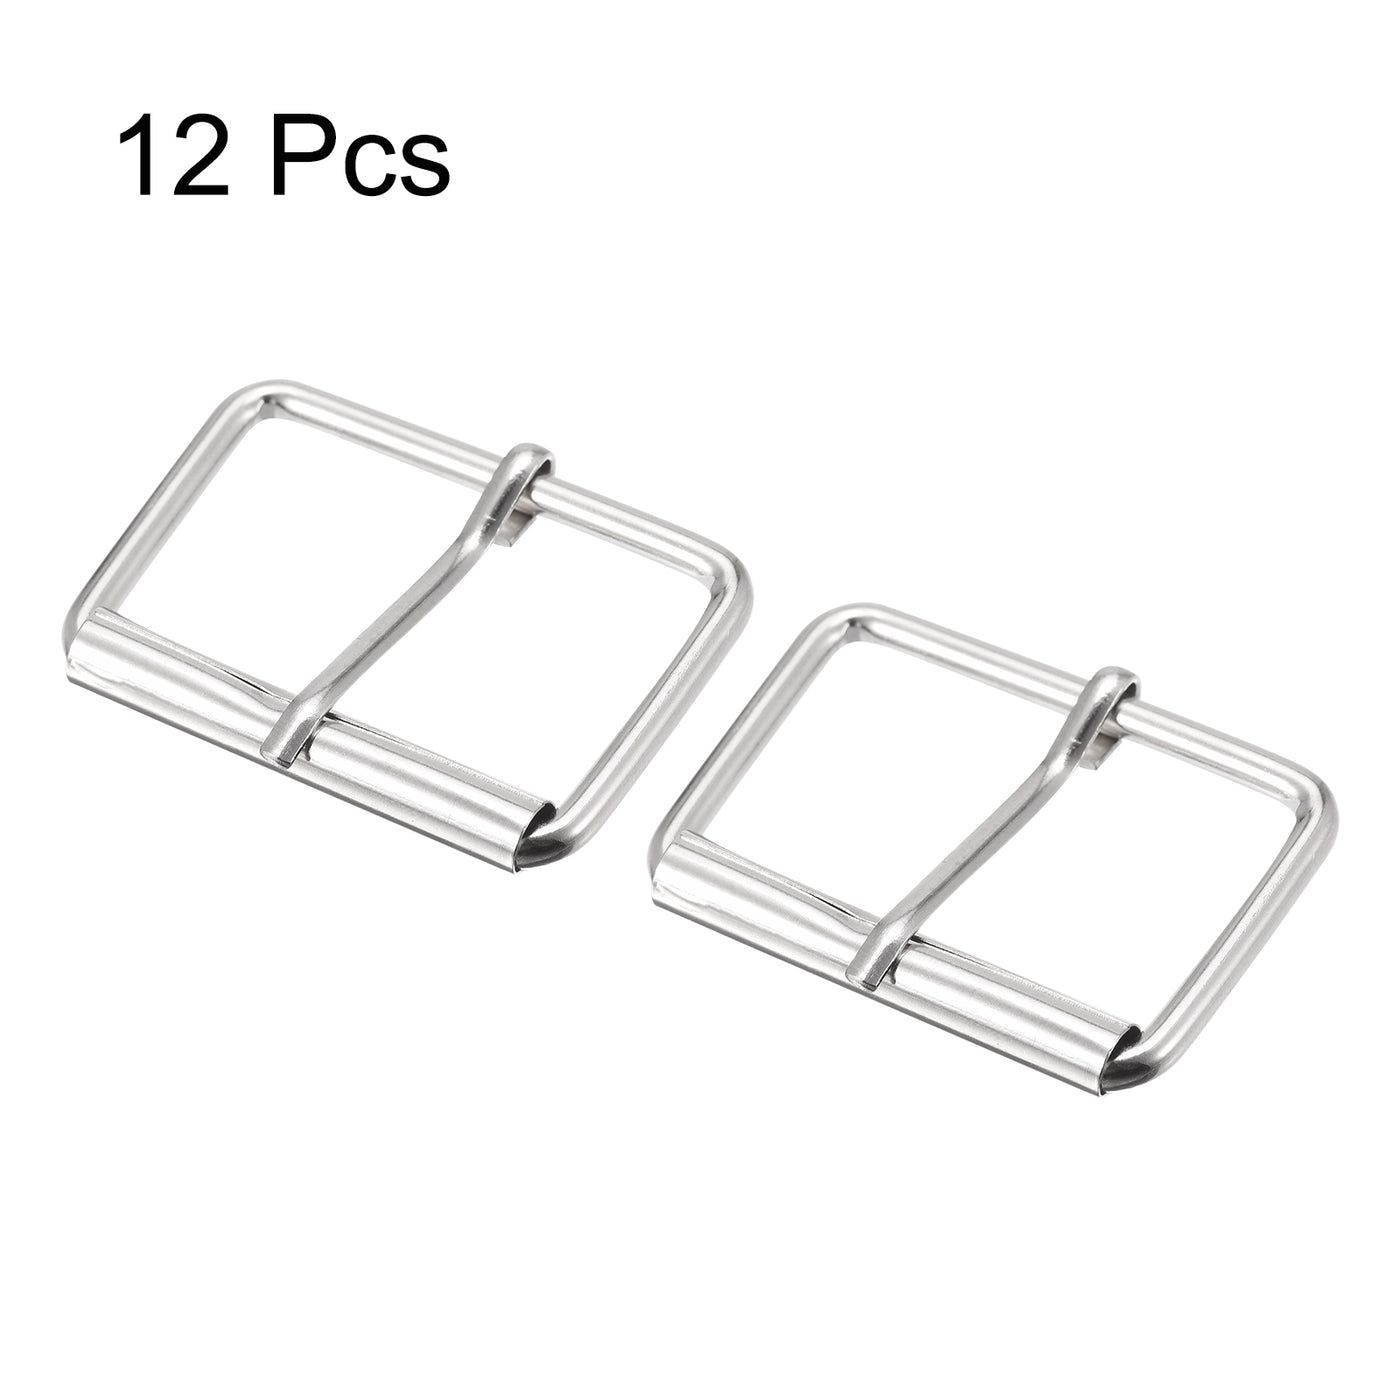 uxcell Uxcell 45mm(1.77") Metal Roller Buckles for Belts Bags Straps DIY Silver Tone 12pcs